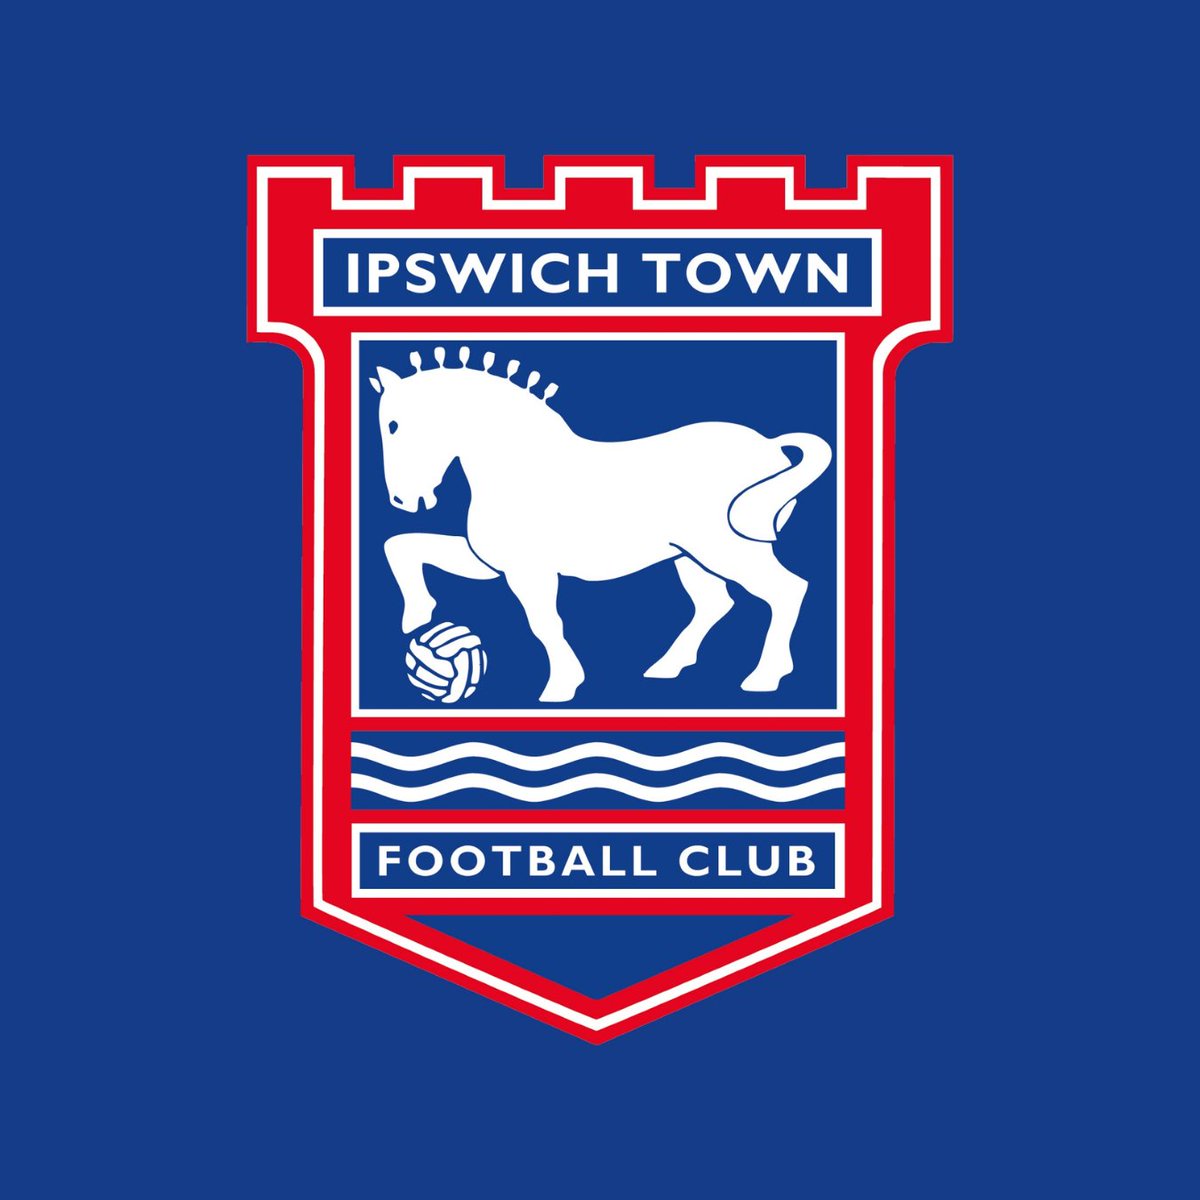 🎉 Uppa Towen! We'll be cheering you on every step of the way @IpswichTown ⚽ 🚜 🔵⚪ #itfc #ipswichtown